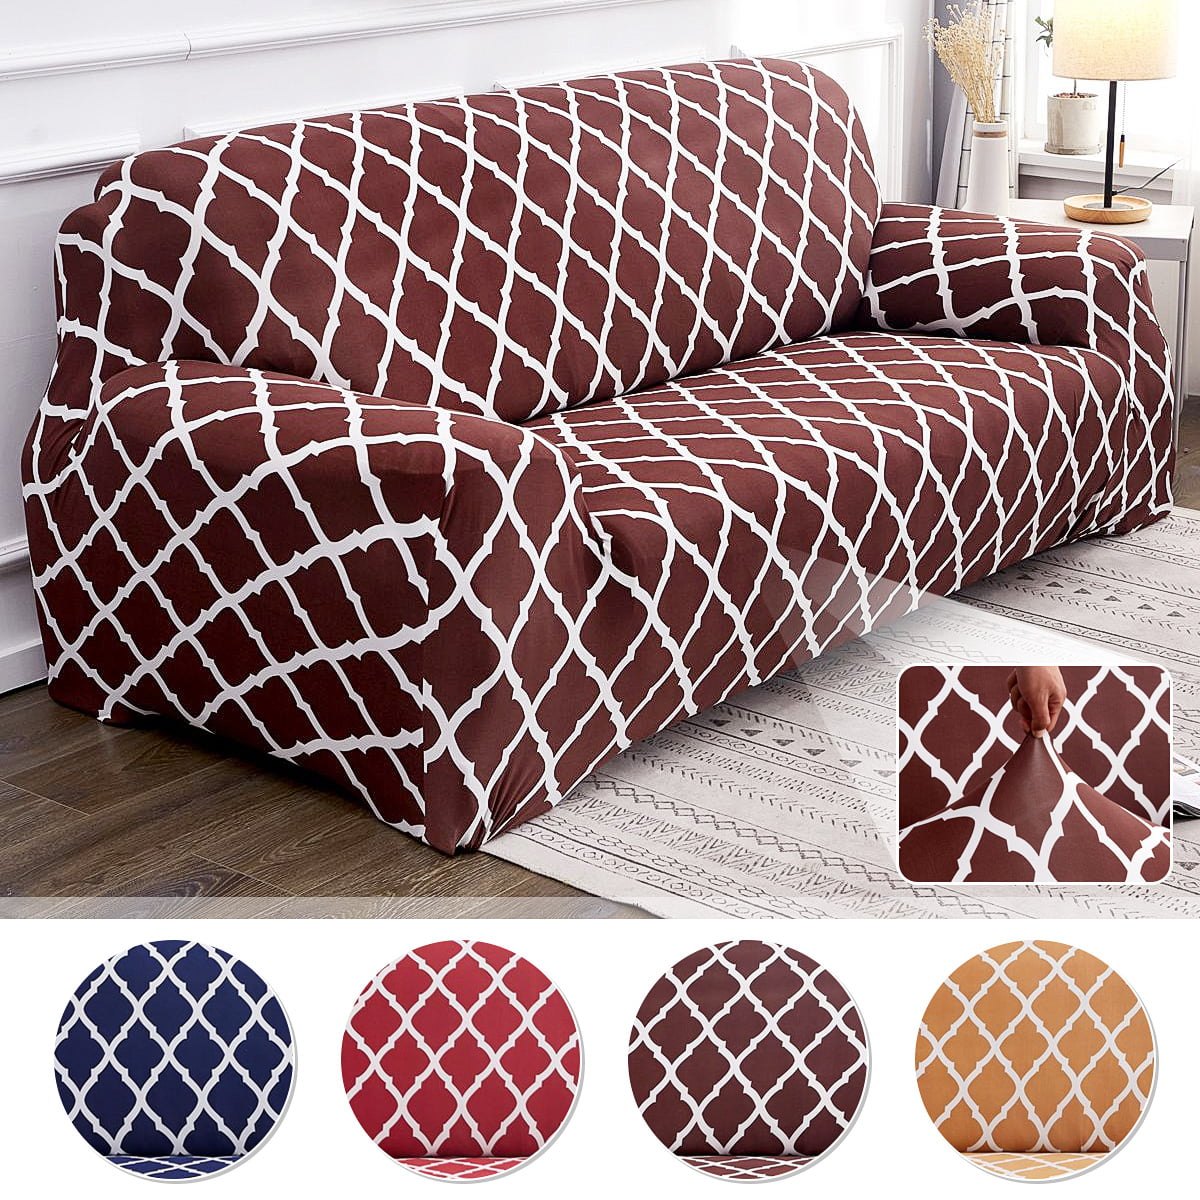 Details about   1/2/3/4 General Sofa Slipcover Elastic Printed Couch Cover Furniture Protector 